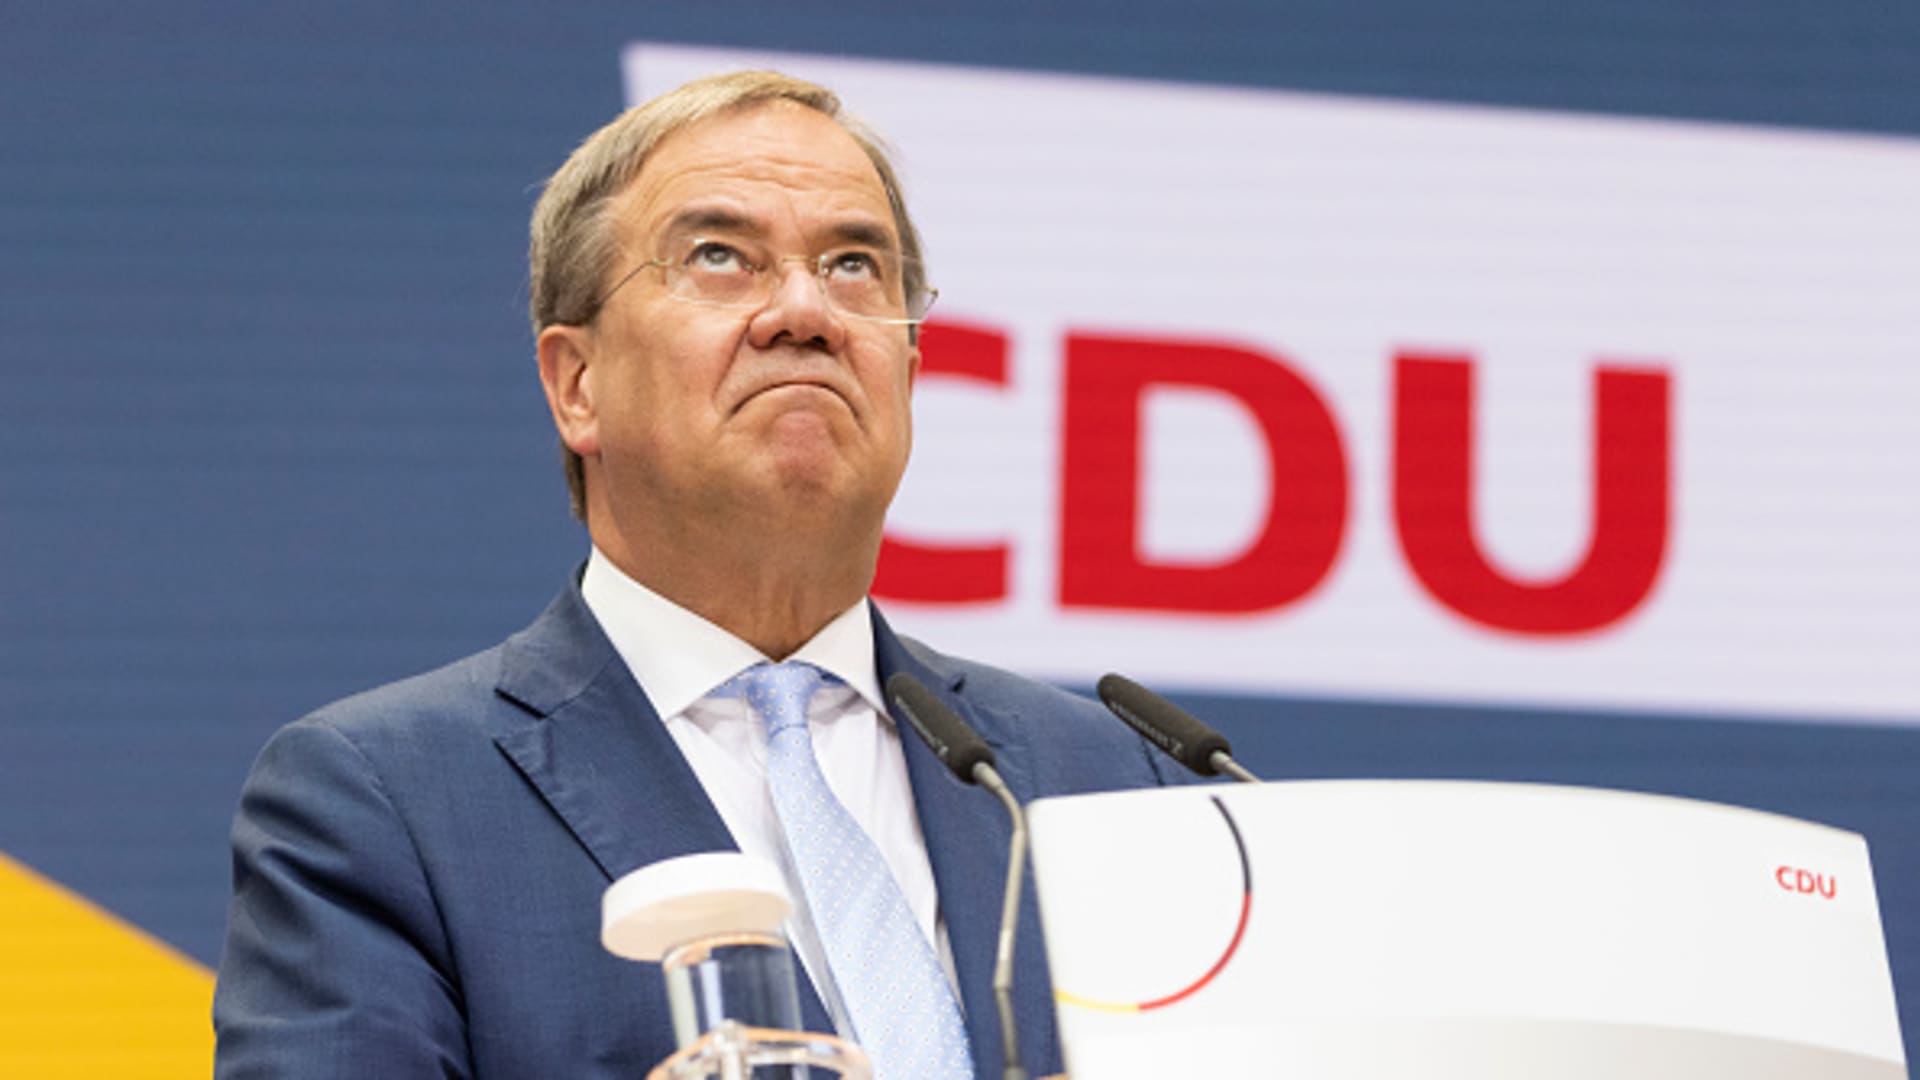 Armin Laschet, chancellor candidate of the Christian Democrats (CDU/CSU) union, speaks at the press conference at CDU headquarters the day after federal elections on September 27, 2021 in Berlin, Germany.